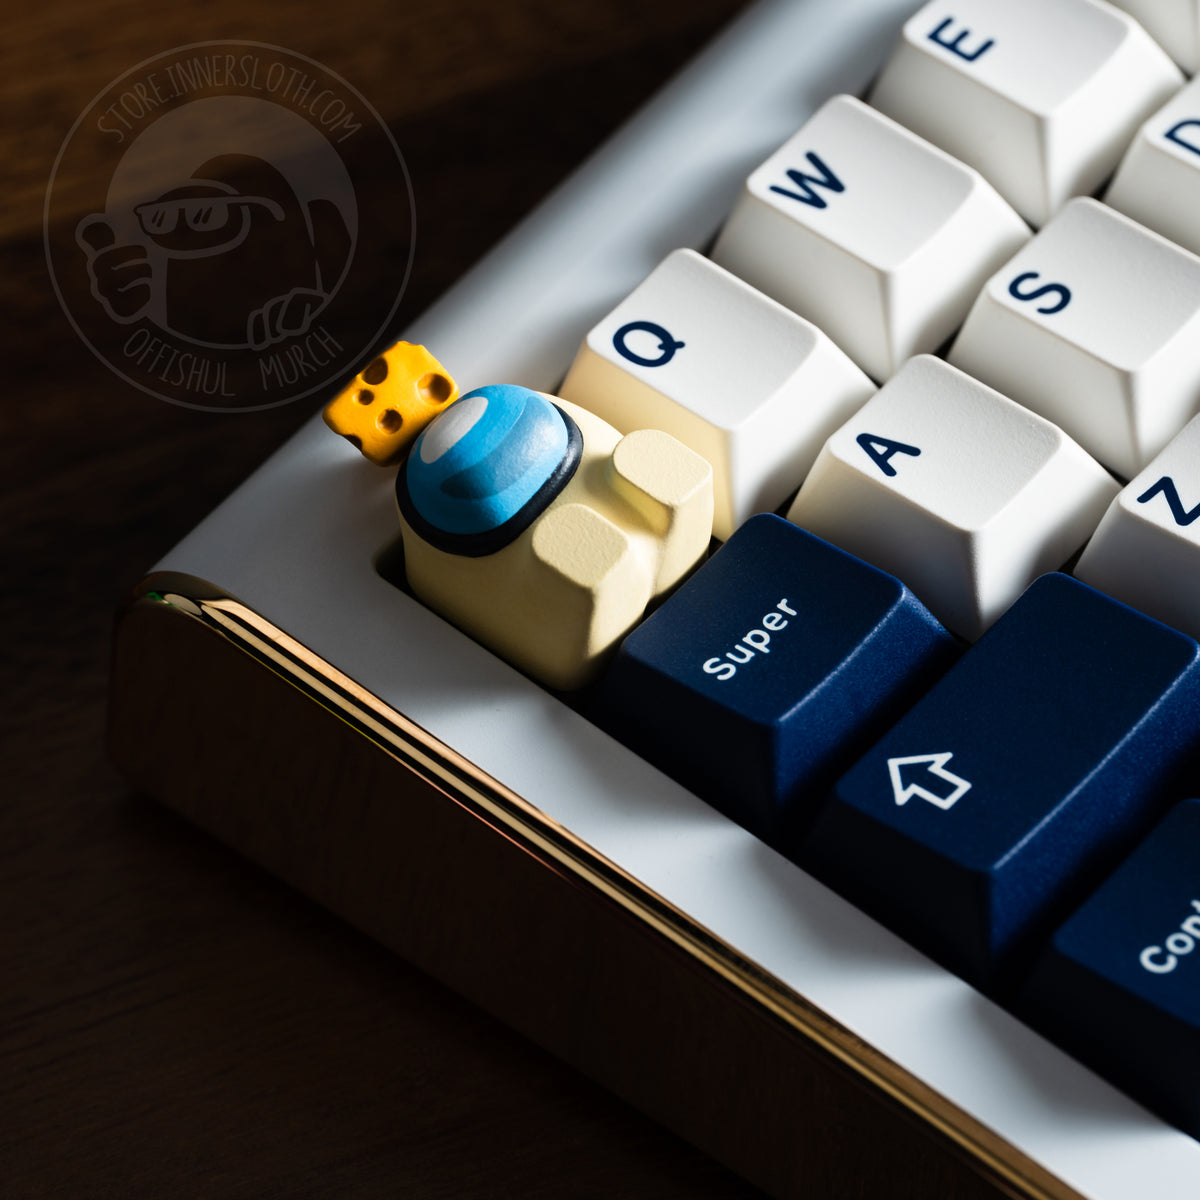 A dramatically lit lifestyle photo of the banana crewmate keycap taking the place of the escape key on a luxe white keyboard. The crewmate keycap figure lays on its back, and is shown with a cheese wedge atop its head.